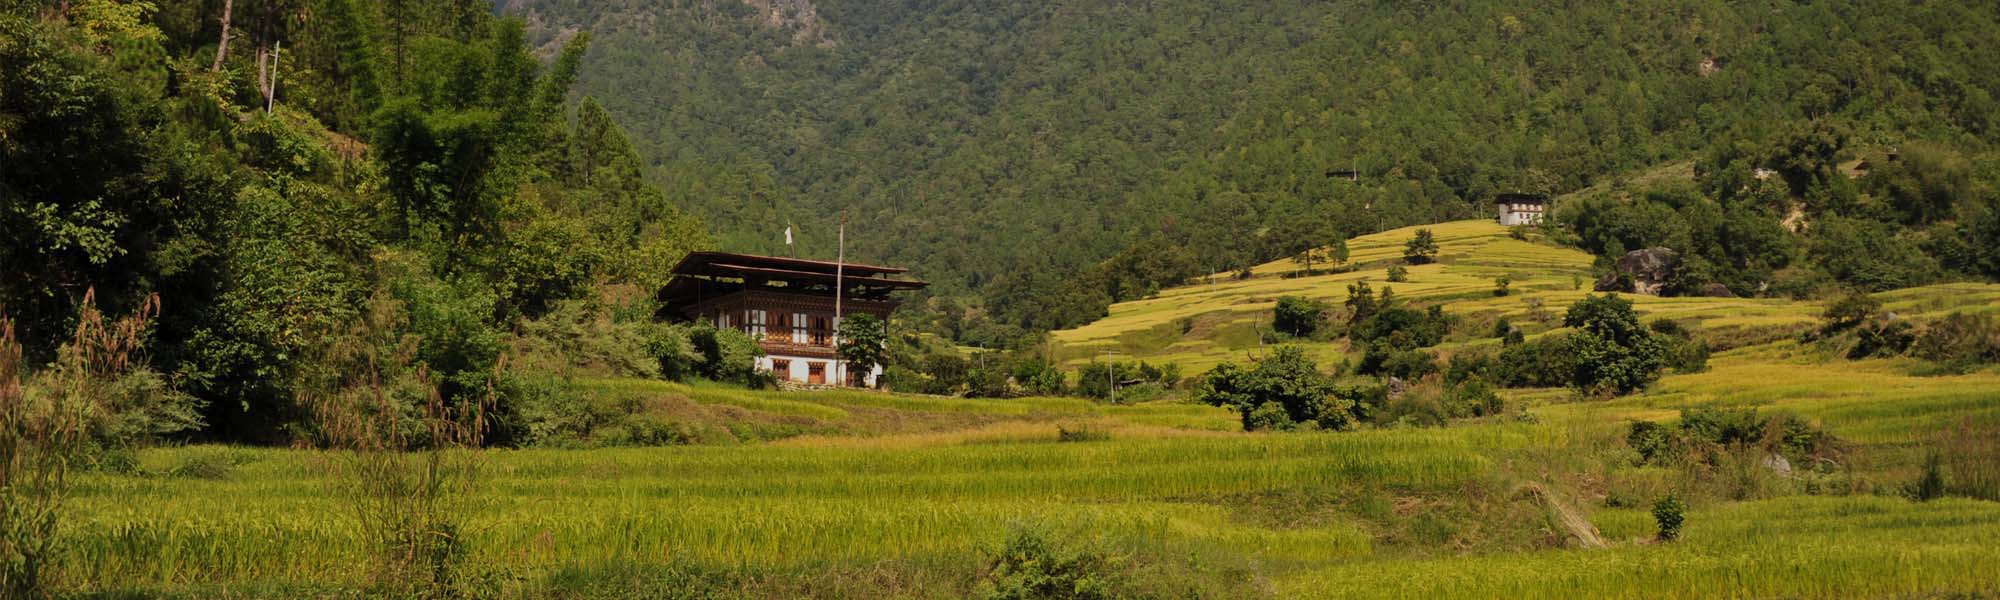 How can I book my Holiday to Bhutan?